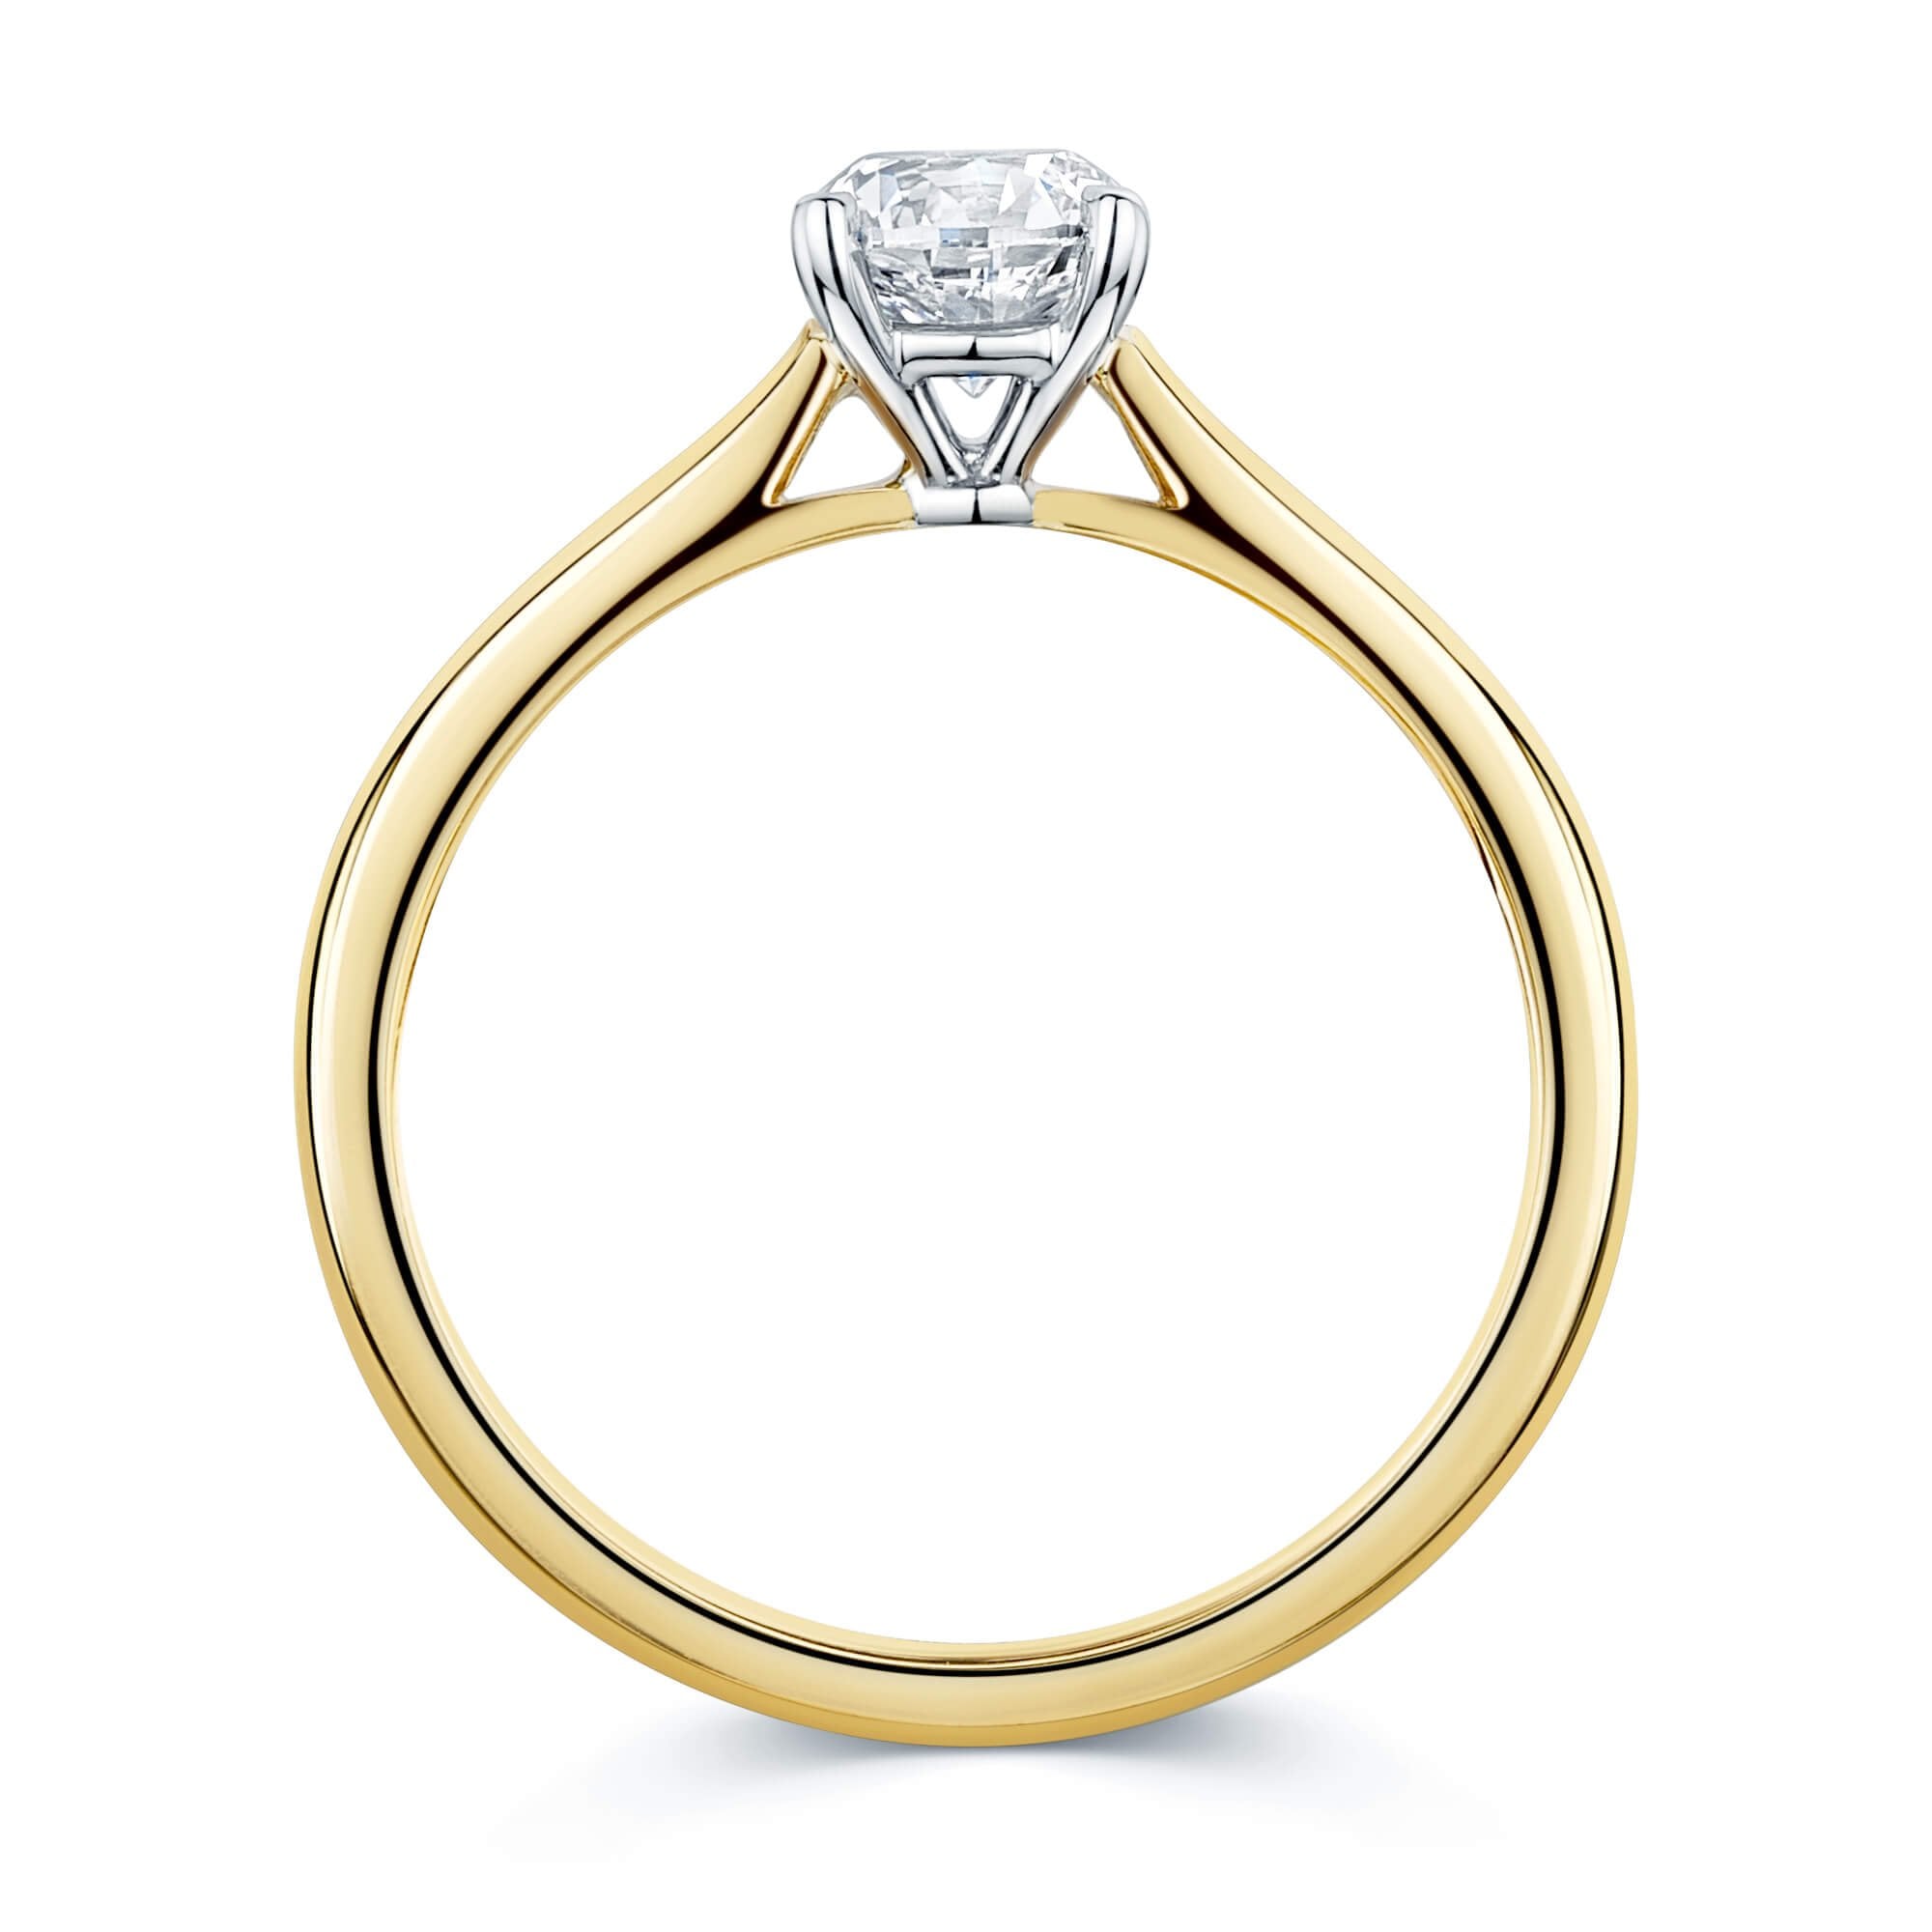 Simply Solitaire Collection 18ct Yellow Gold Diamond Solitaire Engagement Ring GIA Certified 0.70 Carat